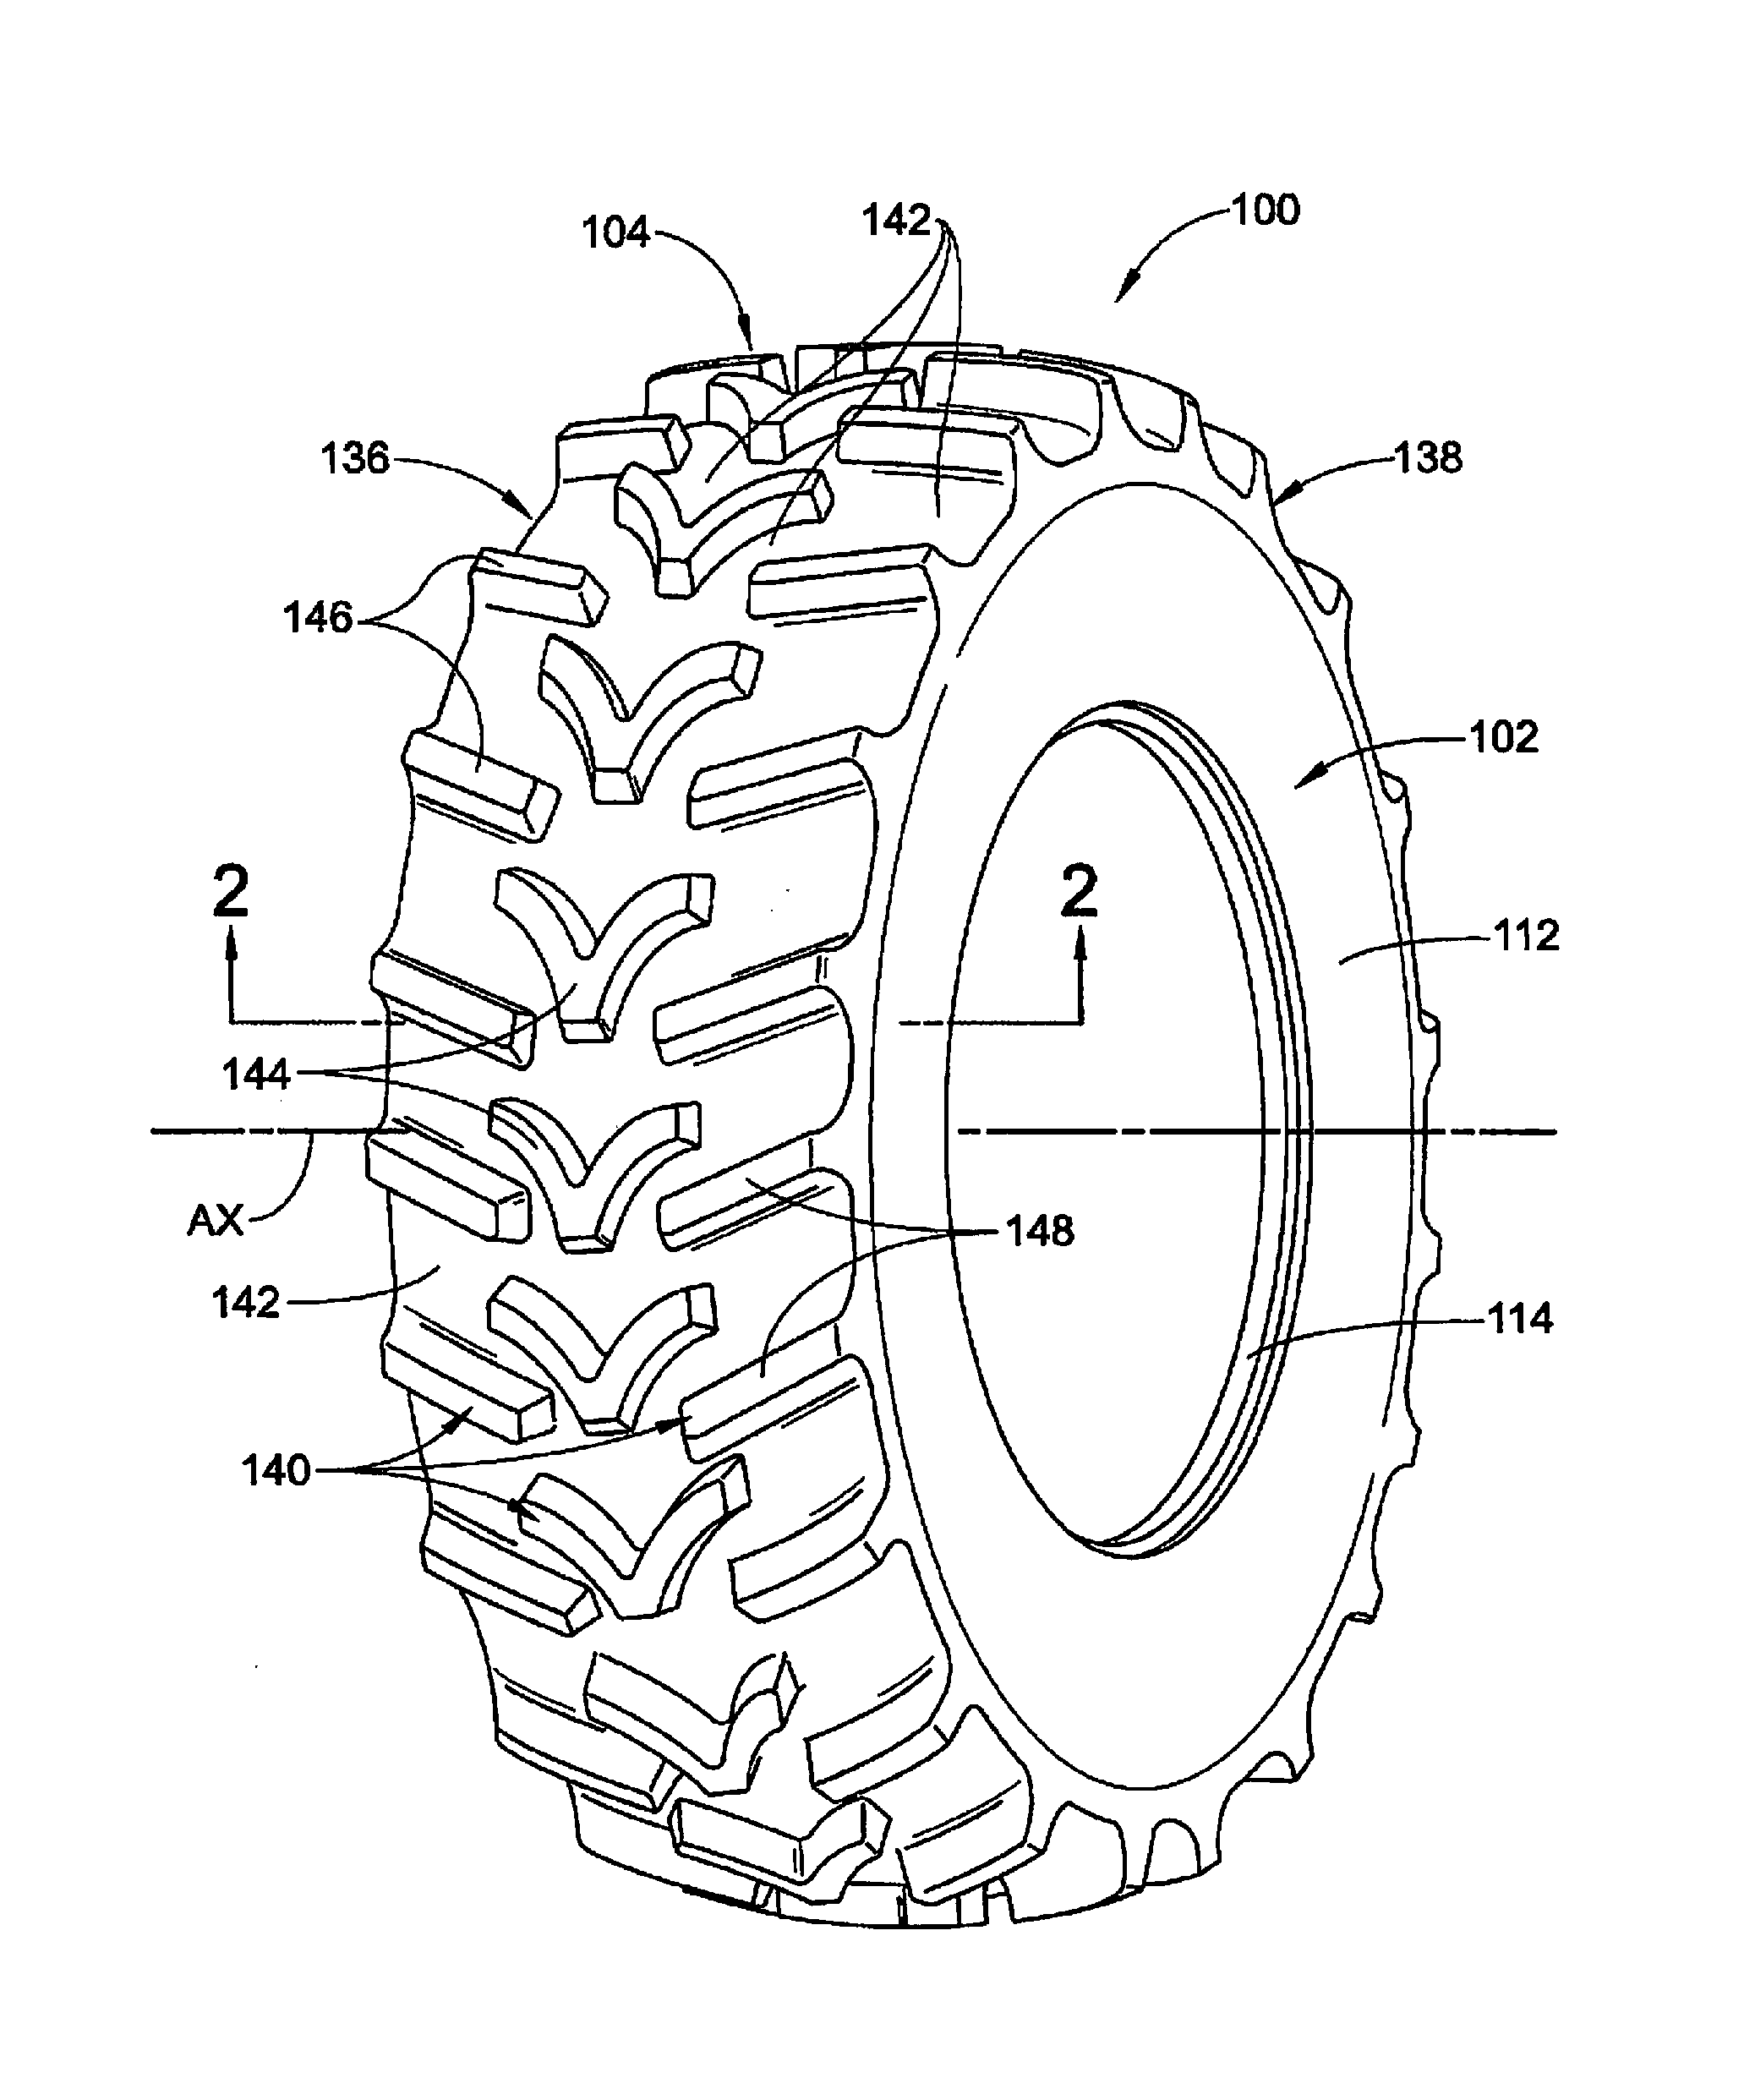 Tire With Noise-Reducing Tread Pattern